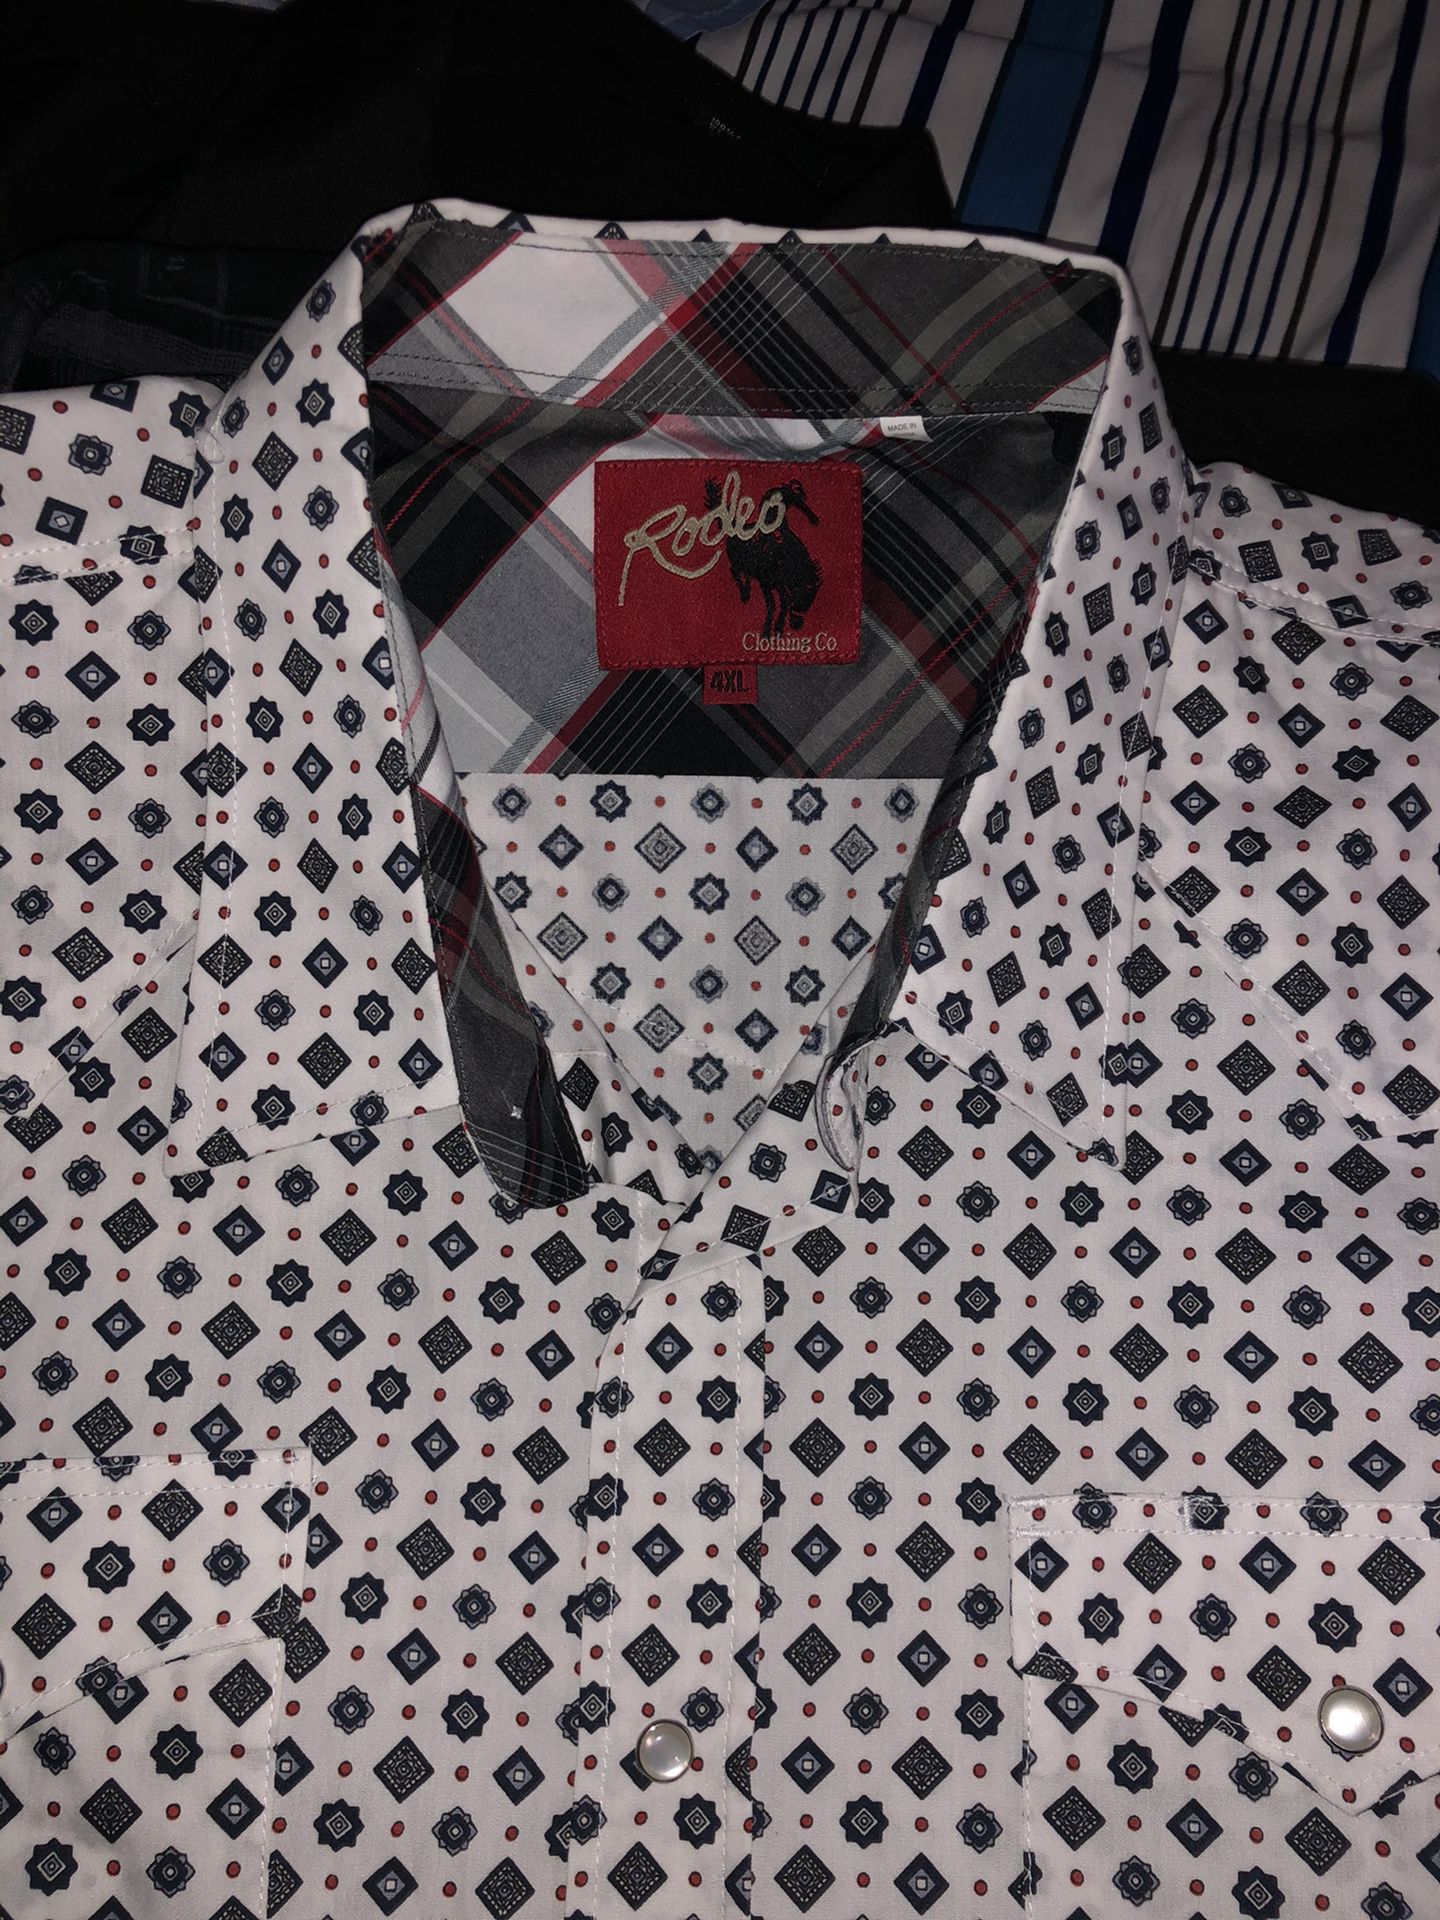 Rodeo branded shirt